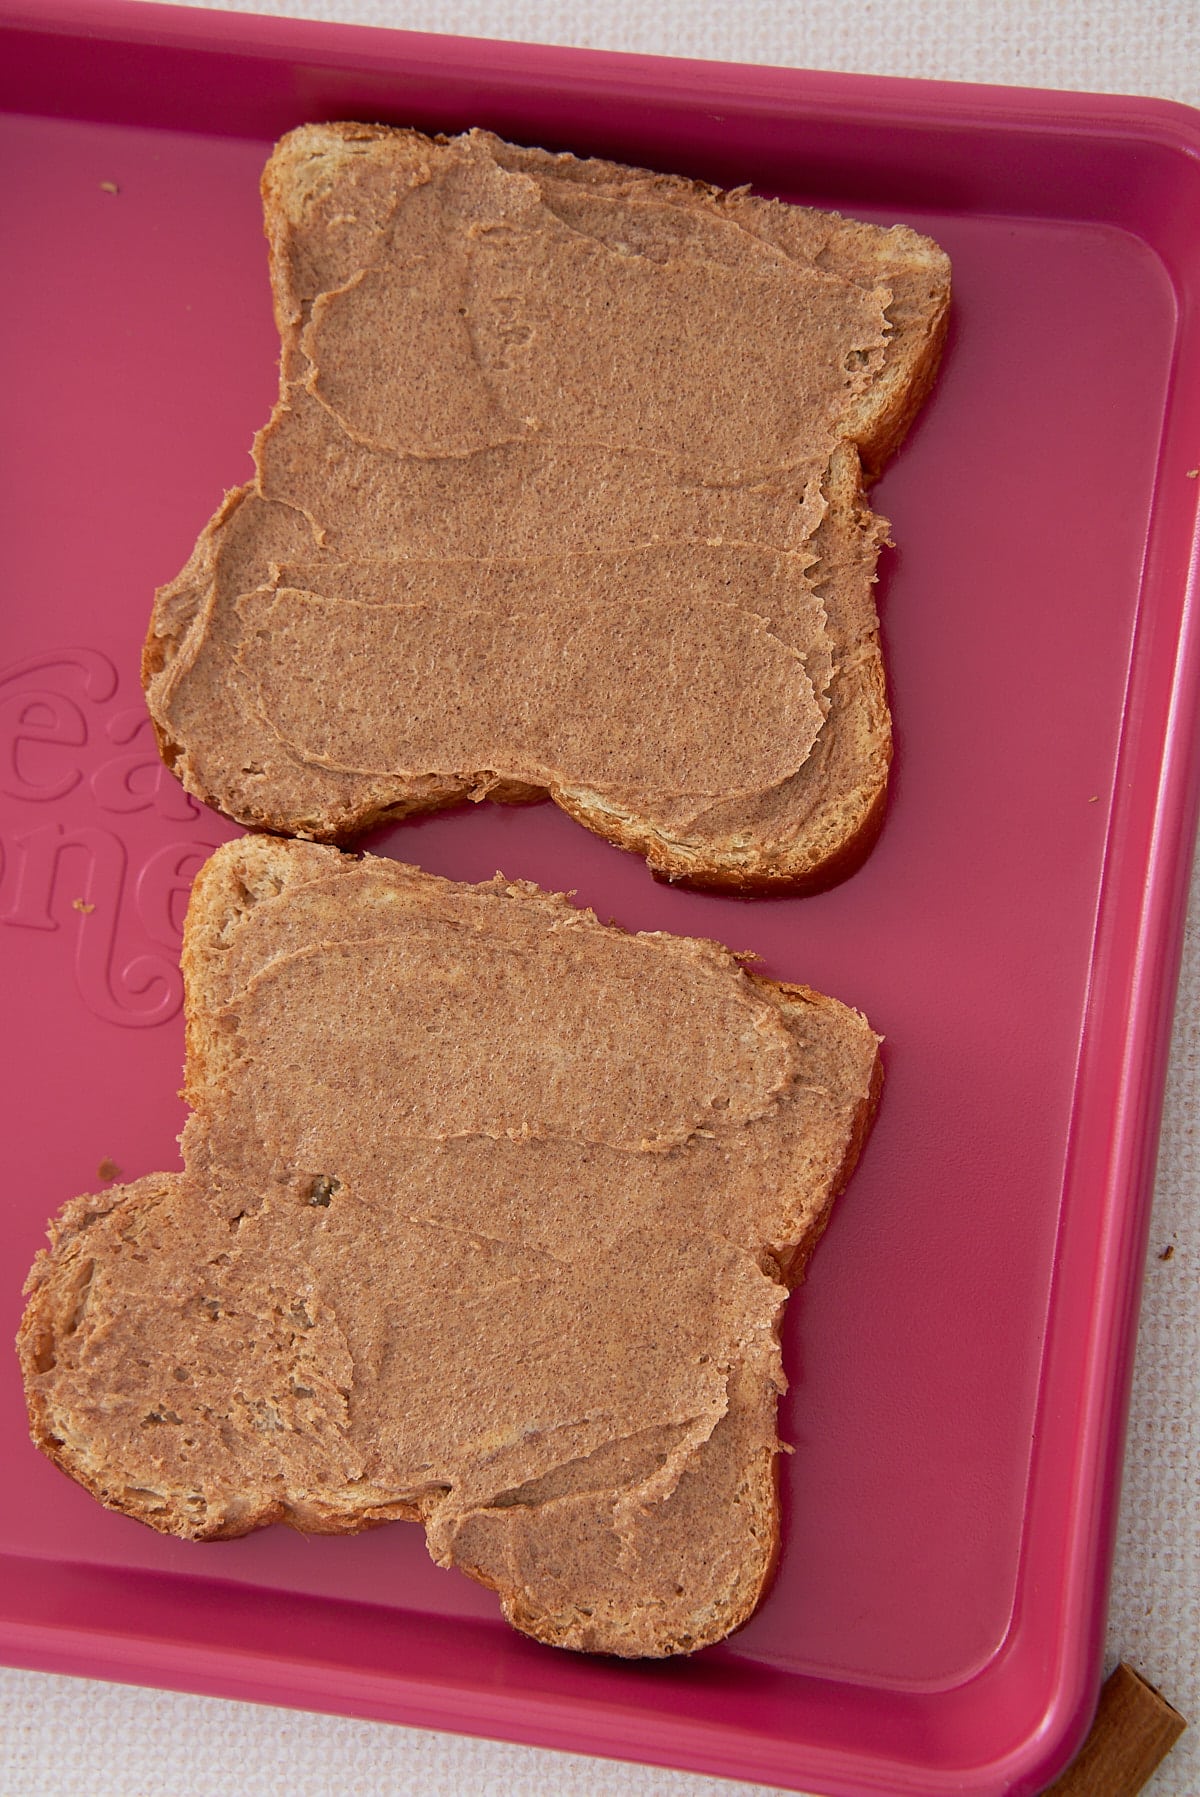 A tray with 2 slices of whole wheat bread topped with cinnamon sugar butter.